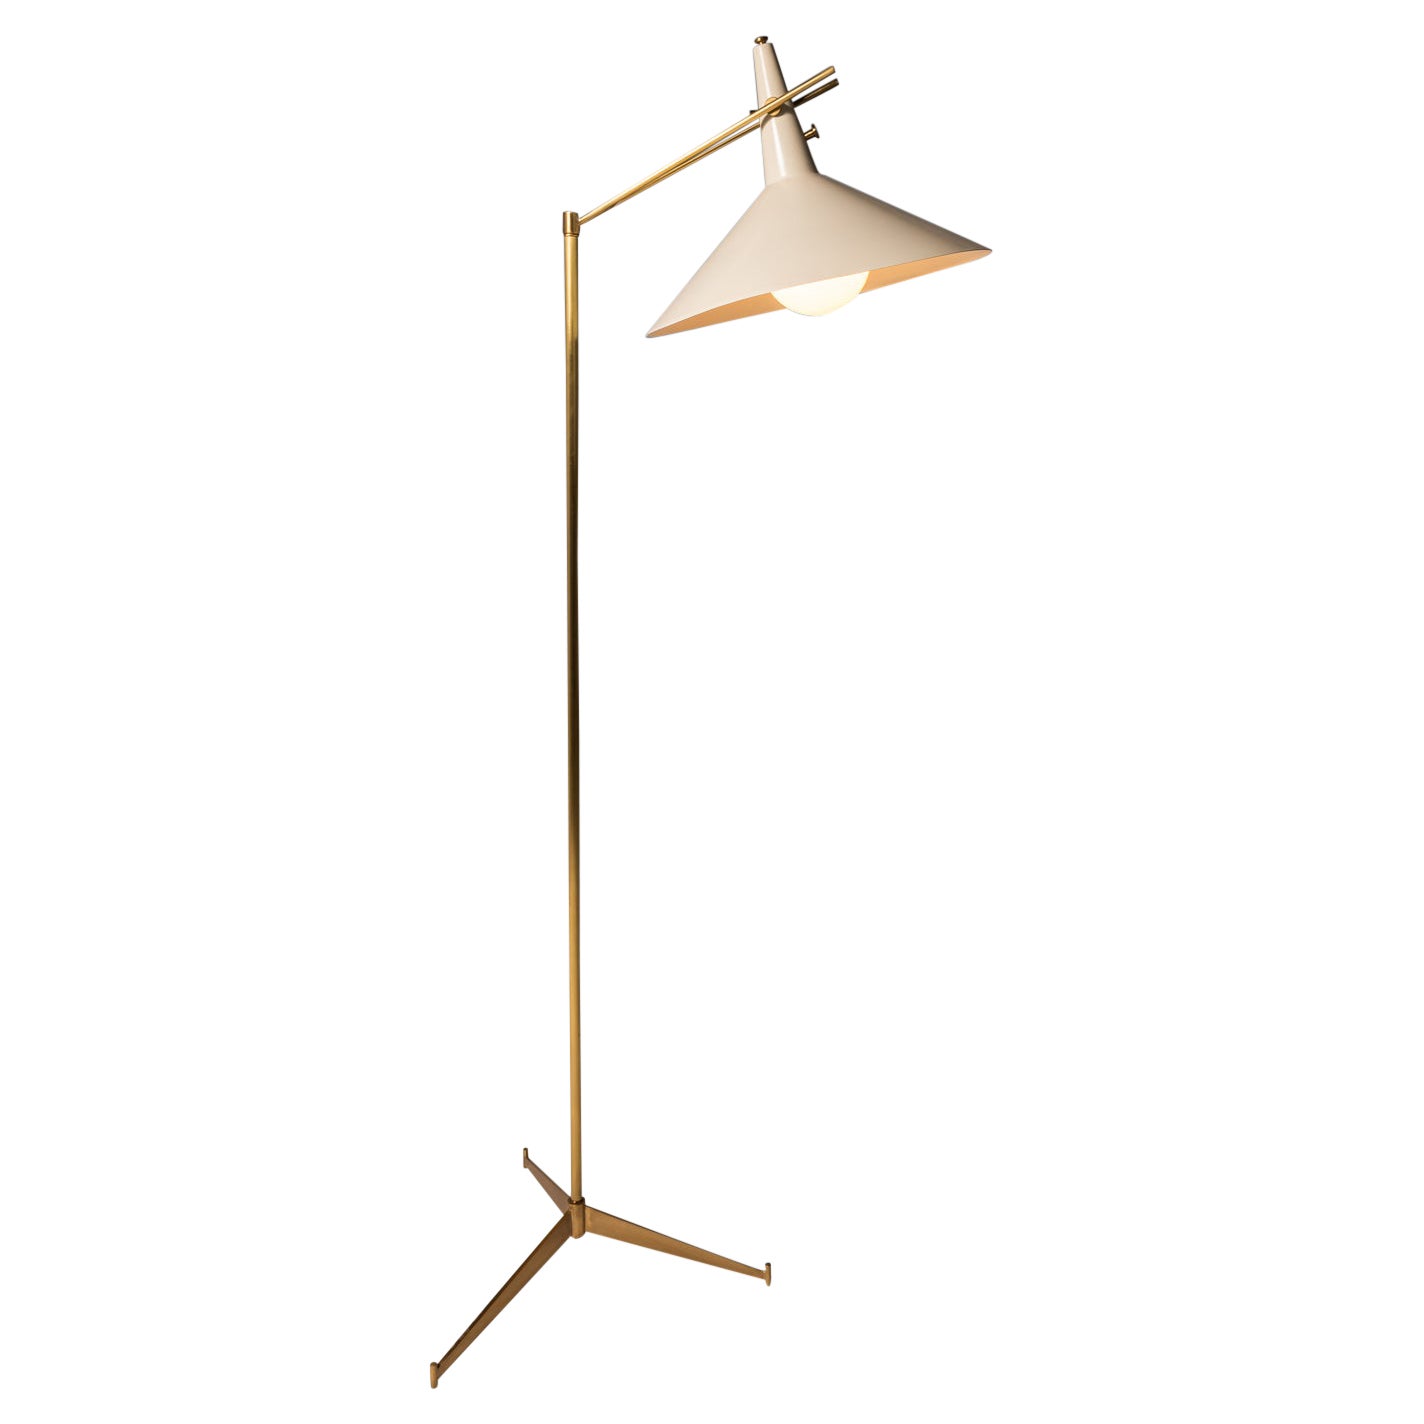 Mid-Century Model E-11 Floor Lamp by Paul McCobb for Directional, USA, c. 1950's For Sale